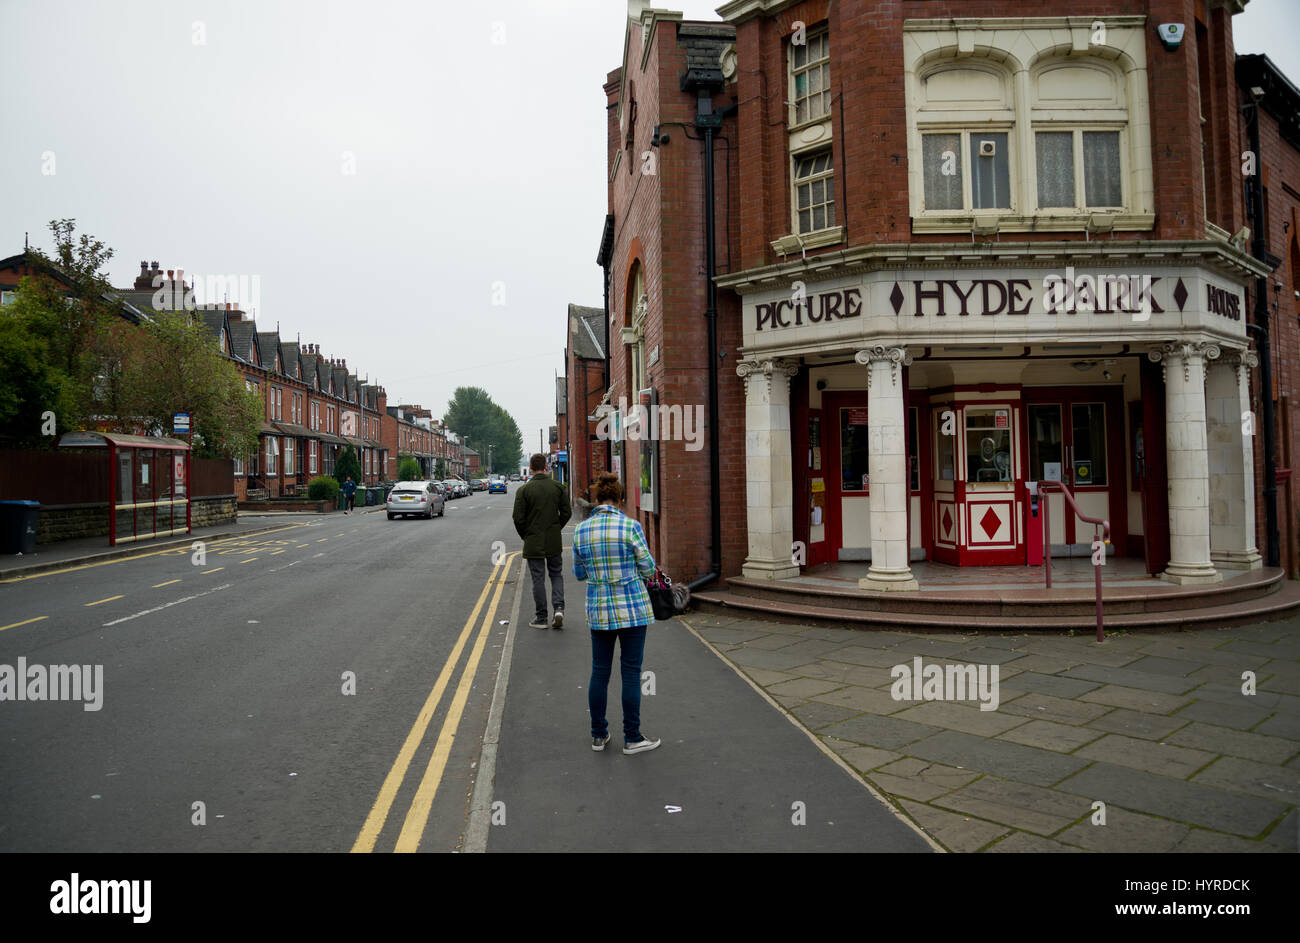 Hyde Park Picture House, Leeds, UK Stock Photo